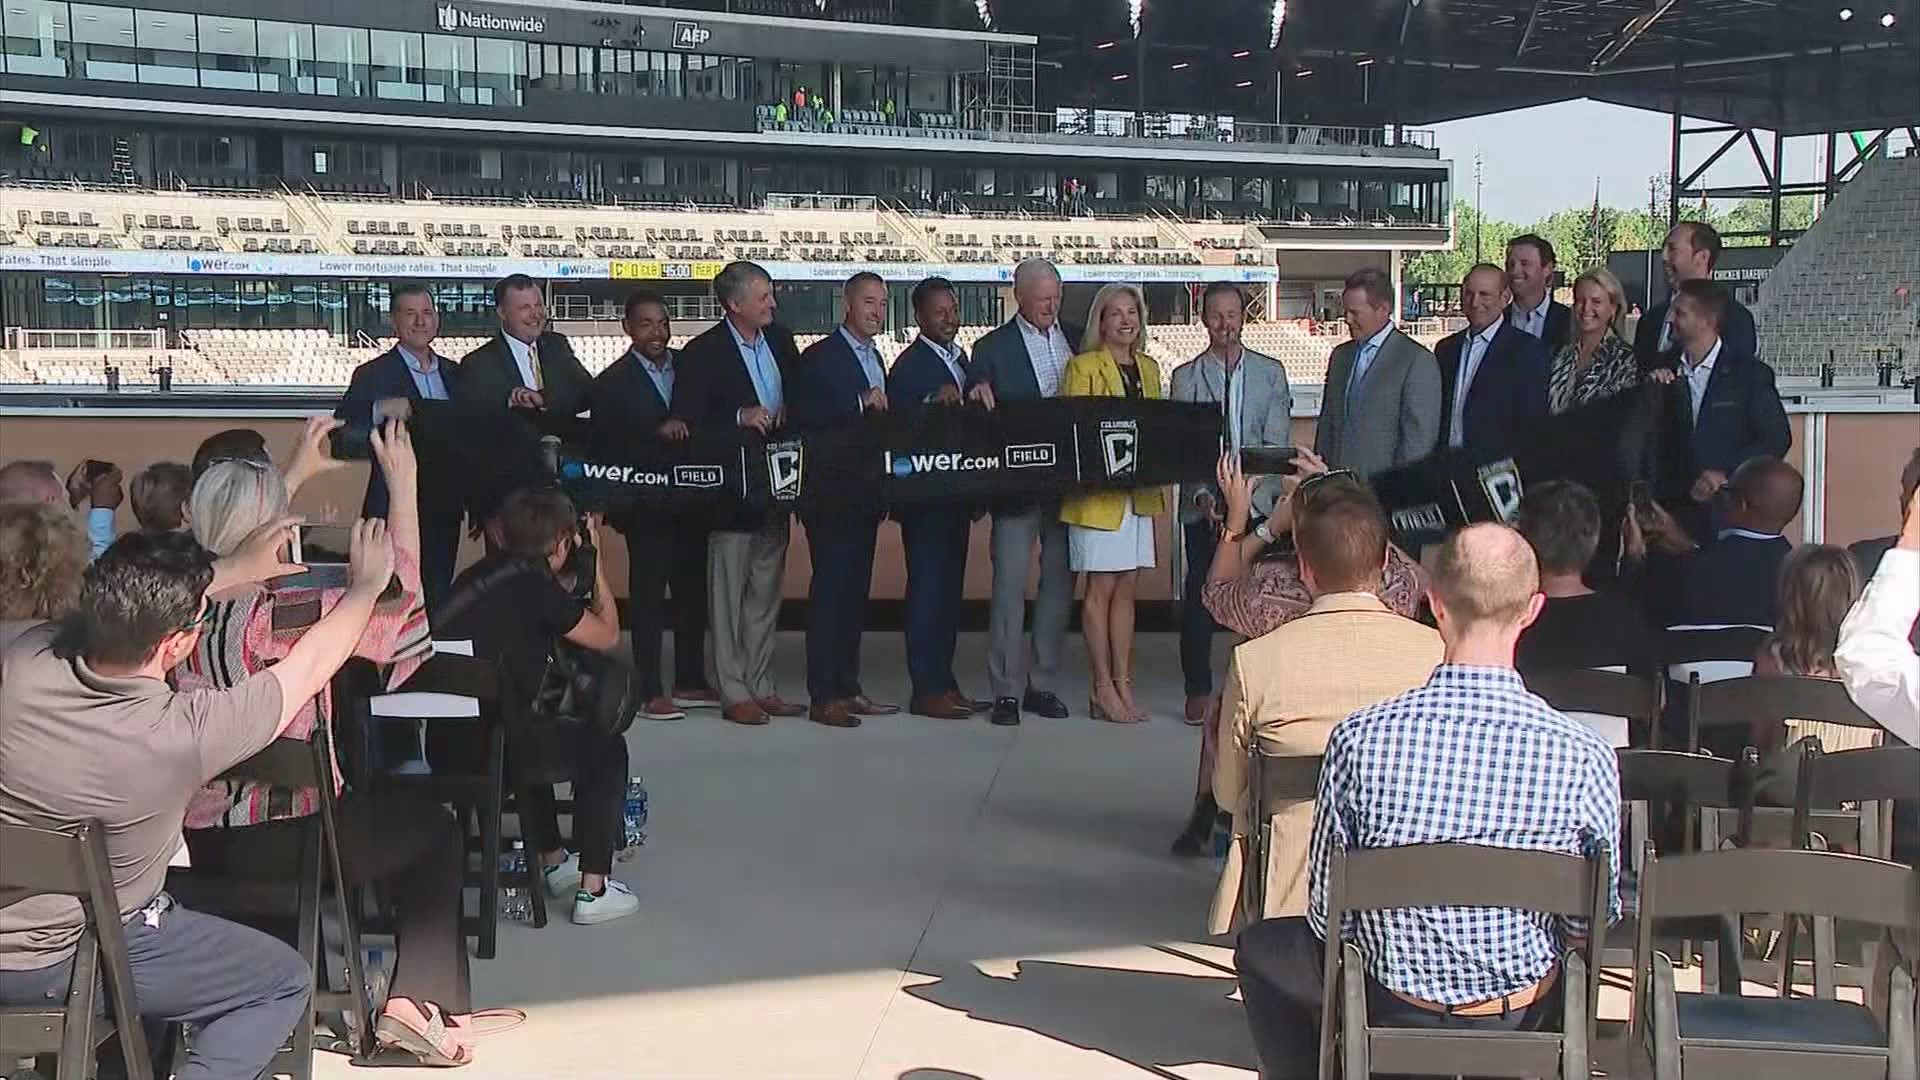 The Columbus Crew held a ceremonial ribbon cutting to recognize the opening of Lower.com Field ahead of the first game this weekend.